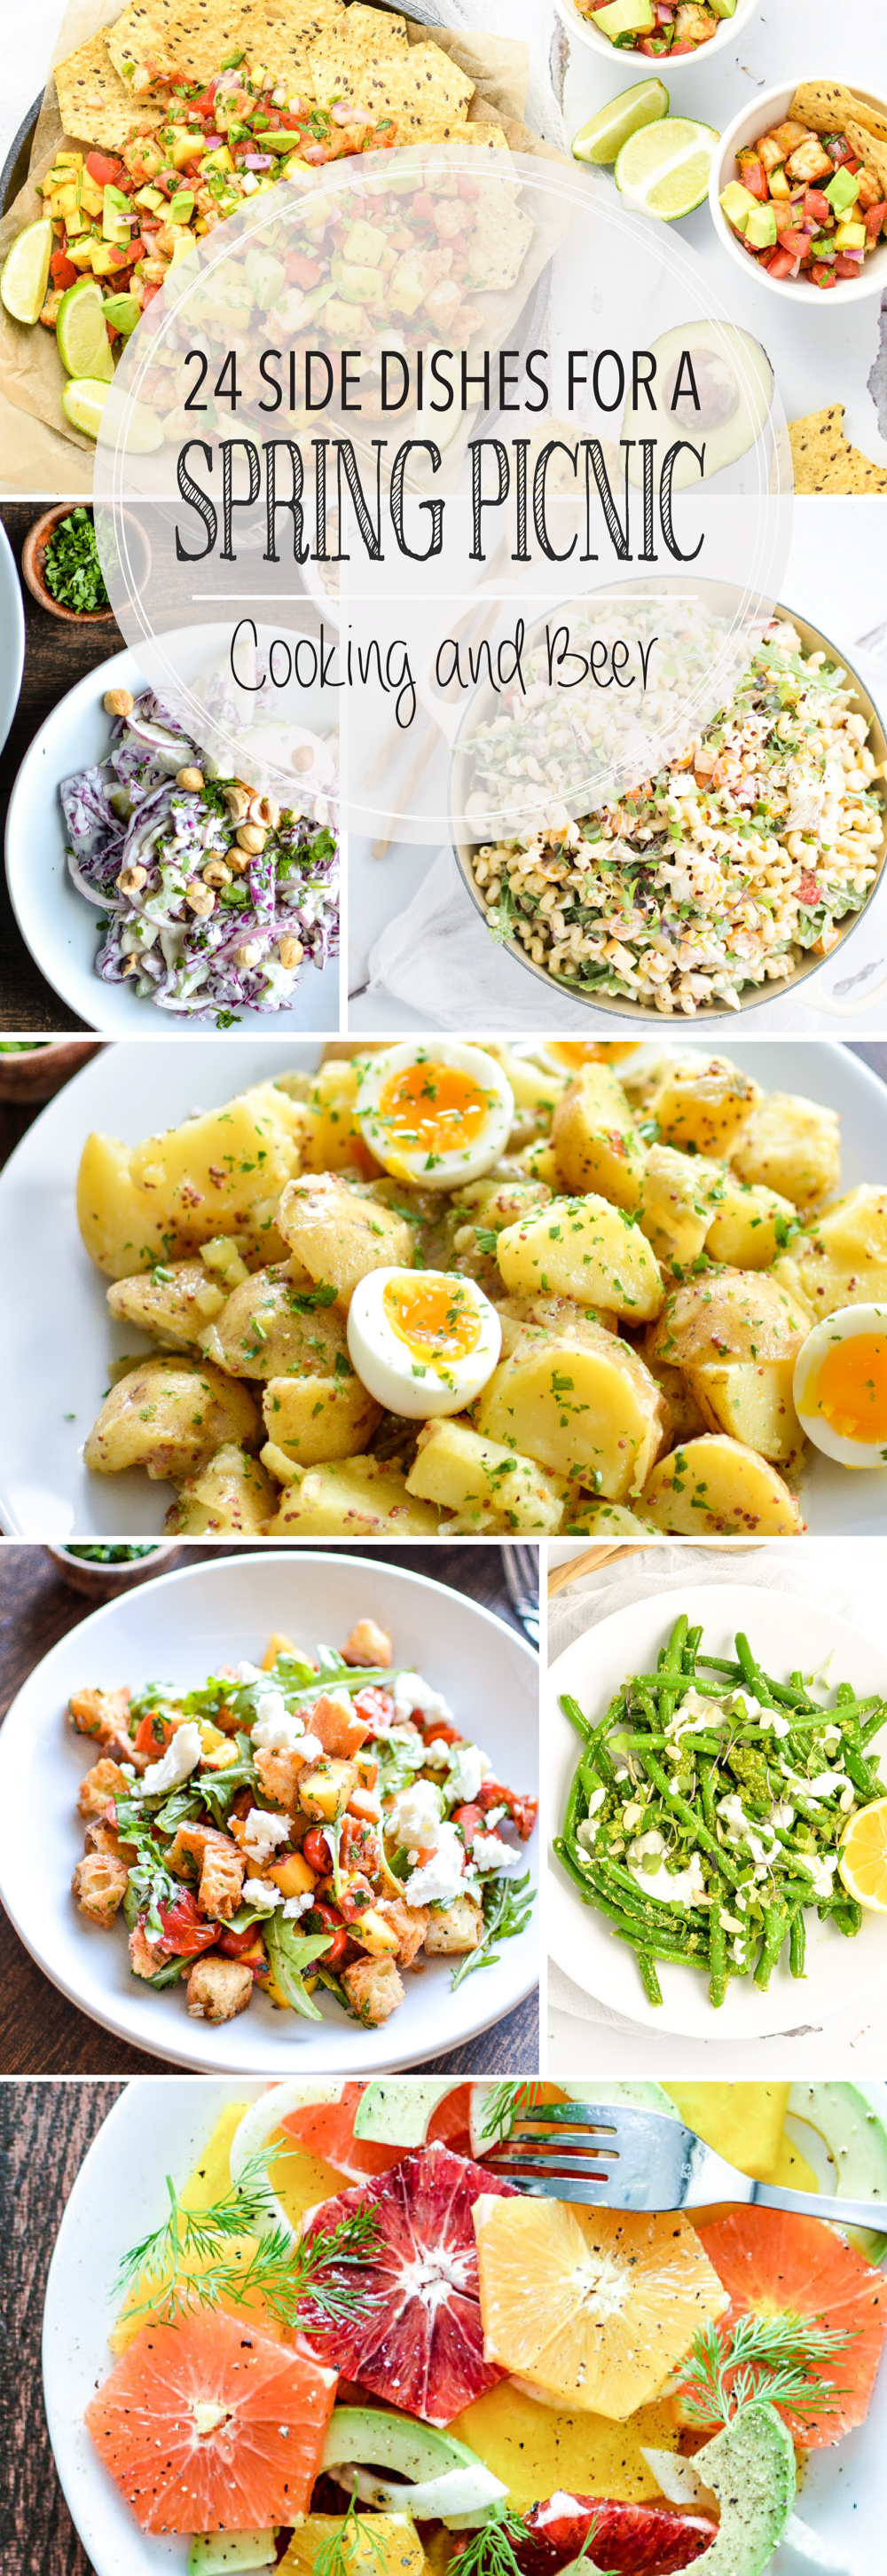 From all-veggie pasta salad to mustard potato salad and from tropical shrimp to herby chicken salad, here are 24 side dishes for a spring picnic!